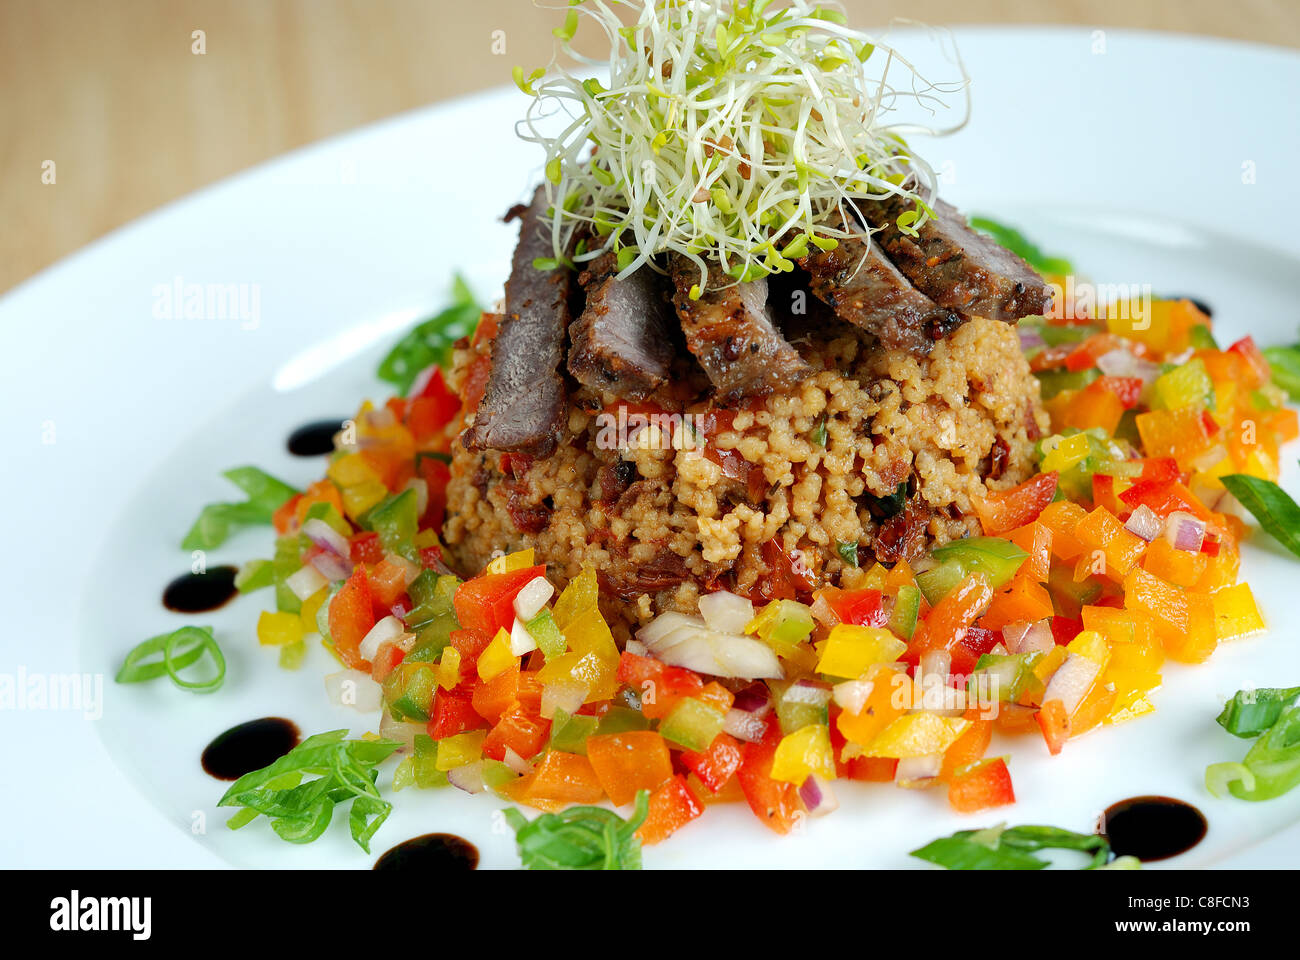 Beef and cous cous salad Stock Photo